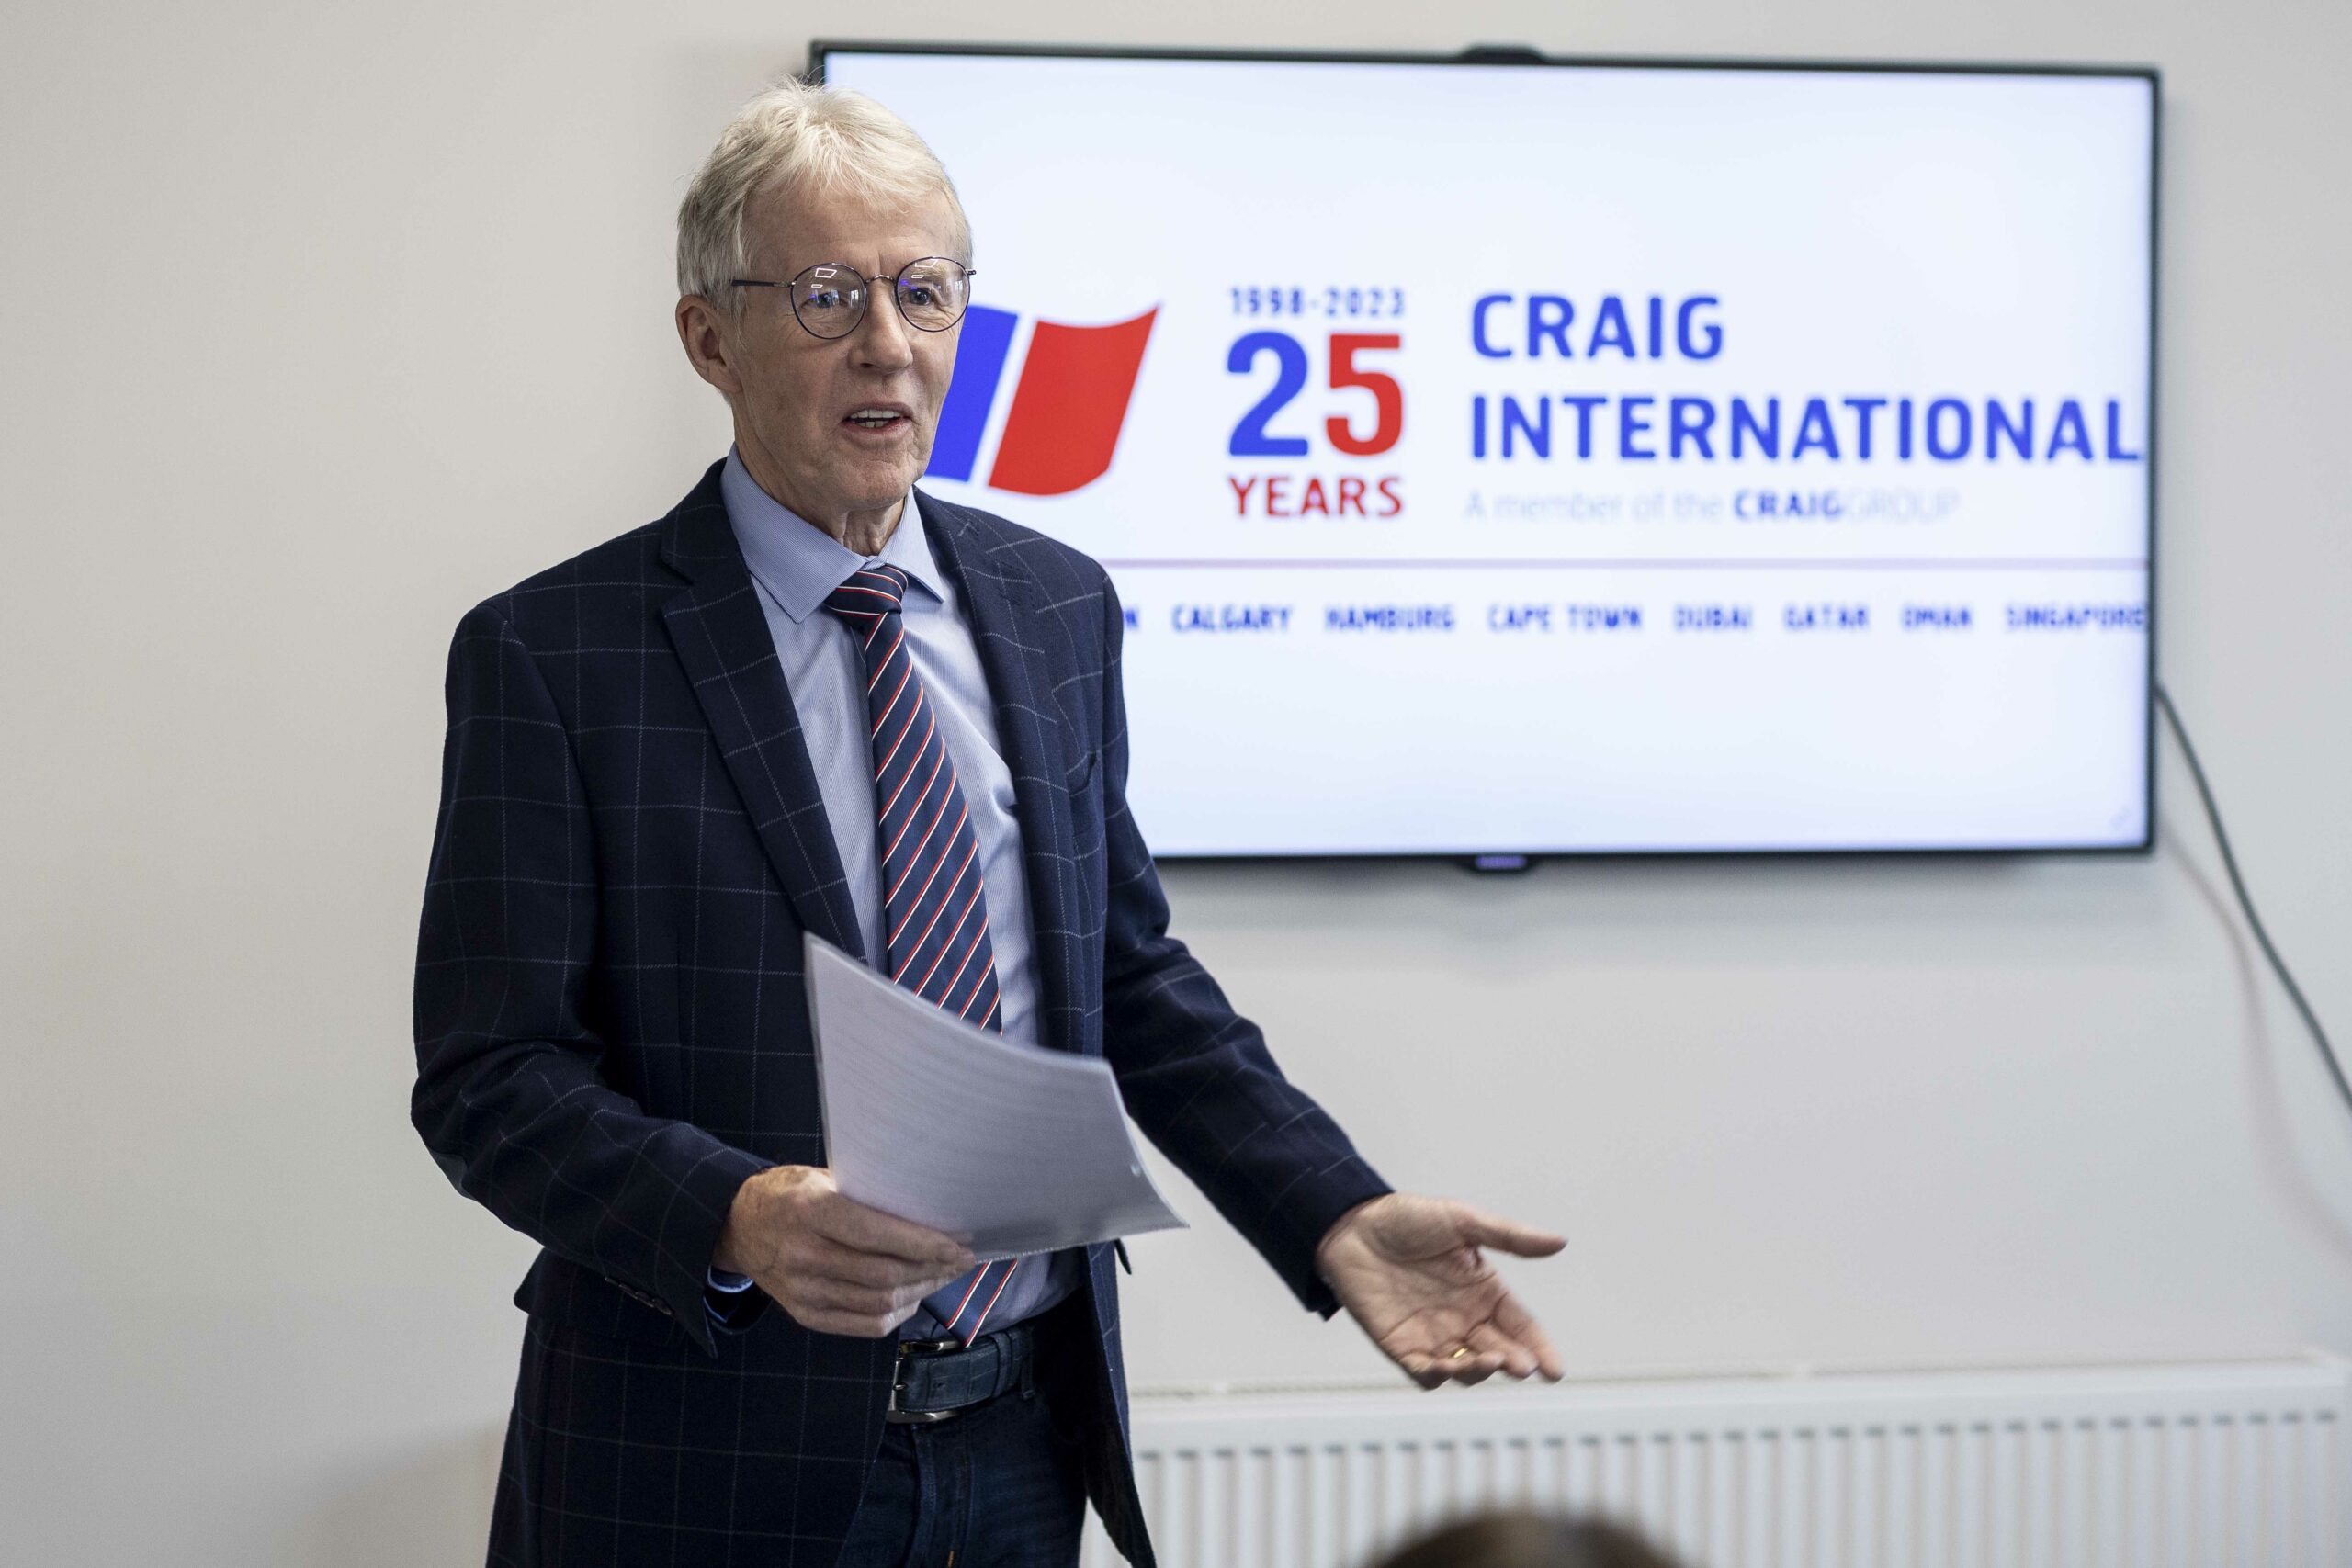 MEMBER NEWS: Exceptional international growth boosts turnover and profits at Craig Group